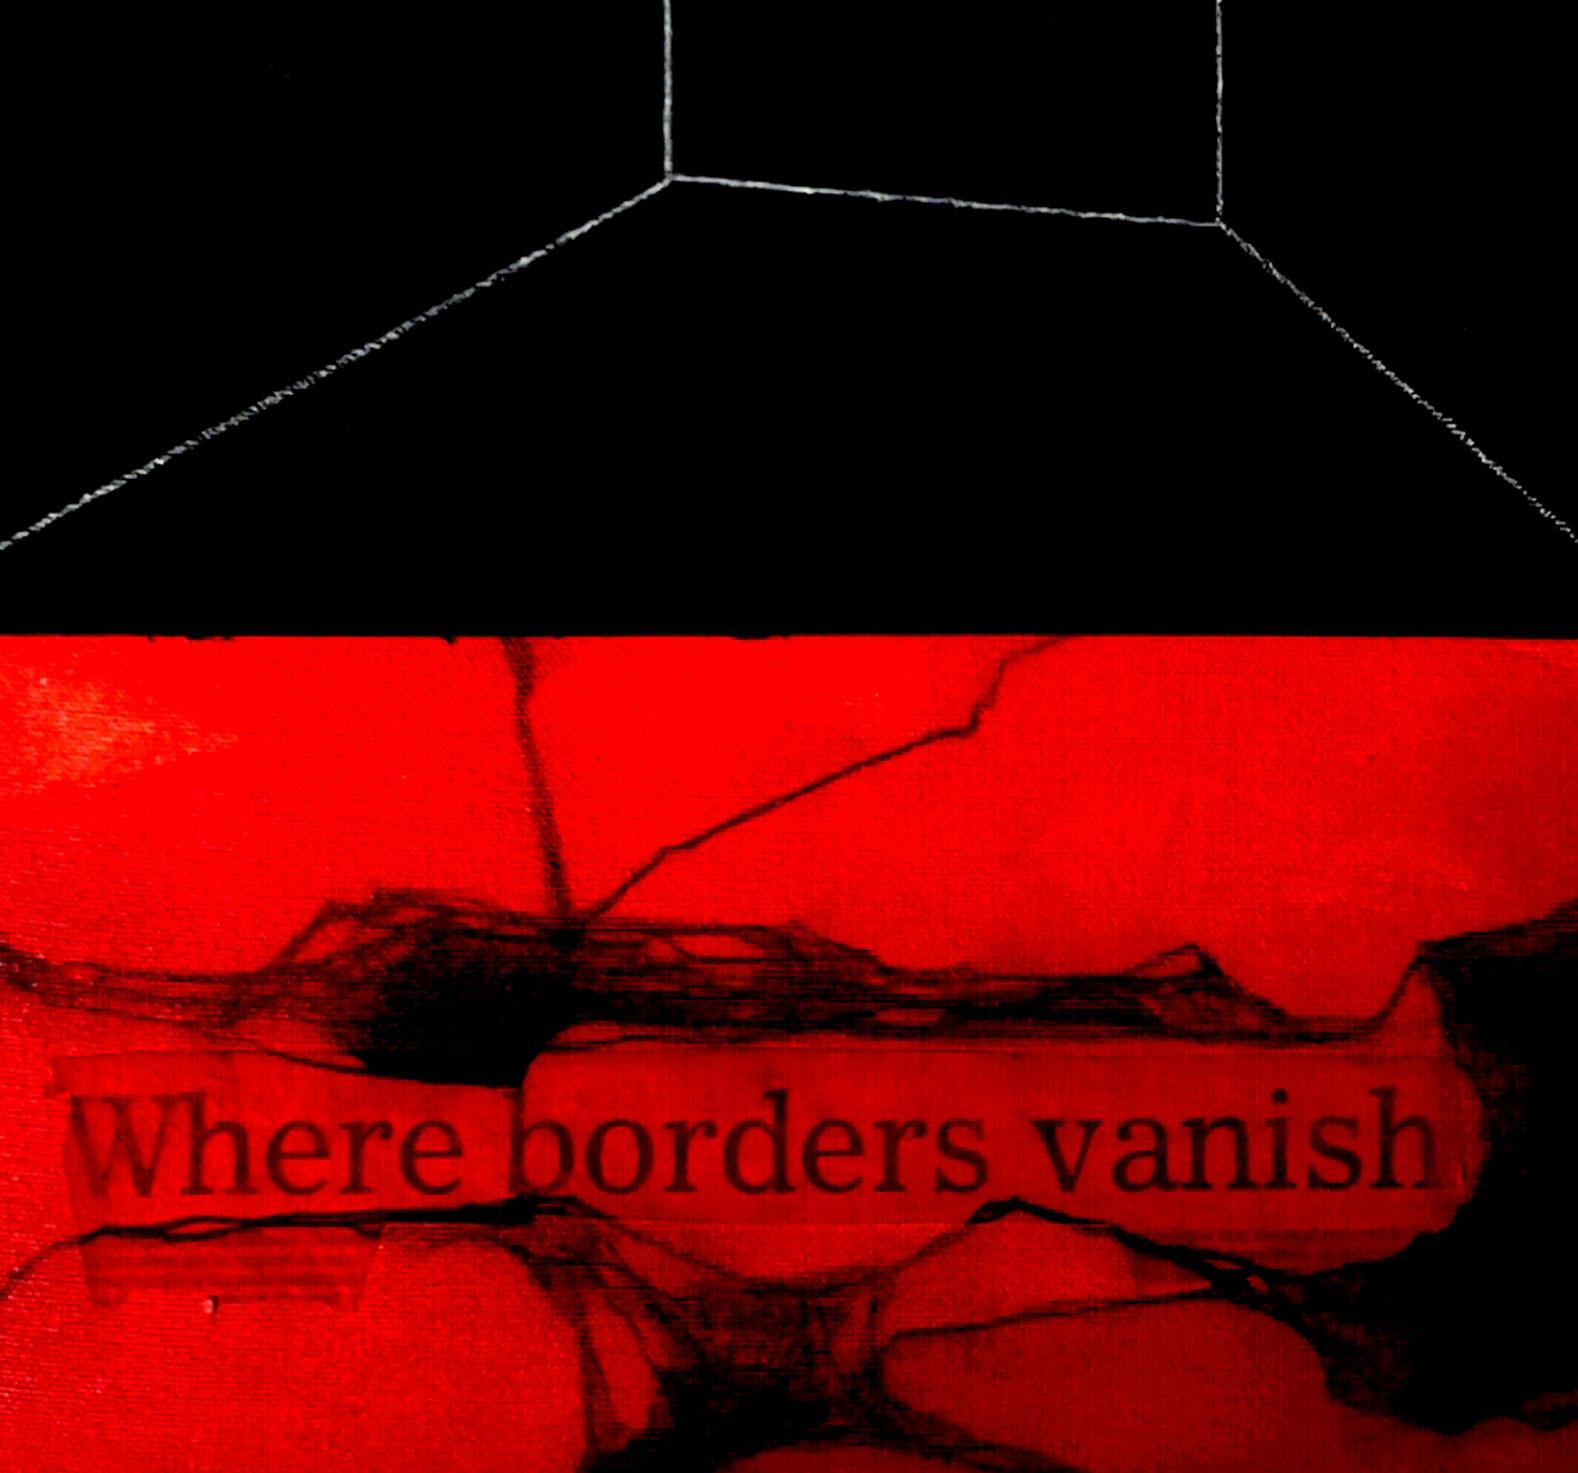 Where Borders Vanish, Abstract, Mixed Media on Canvas, Red, Black 